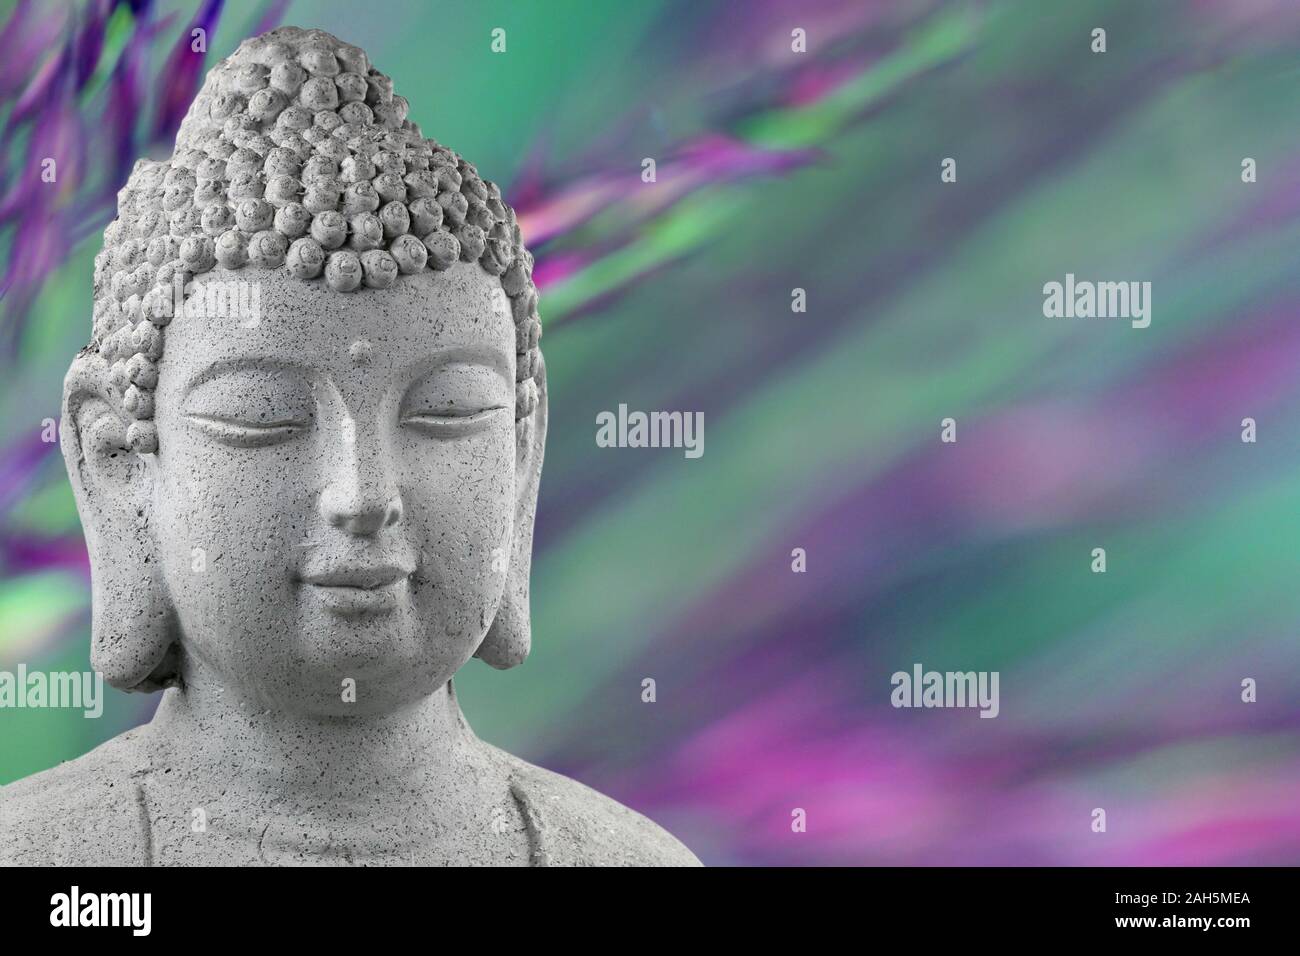 buddha statue head isolated on blurred green and purple background with copy space Stock Photo